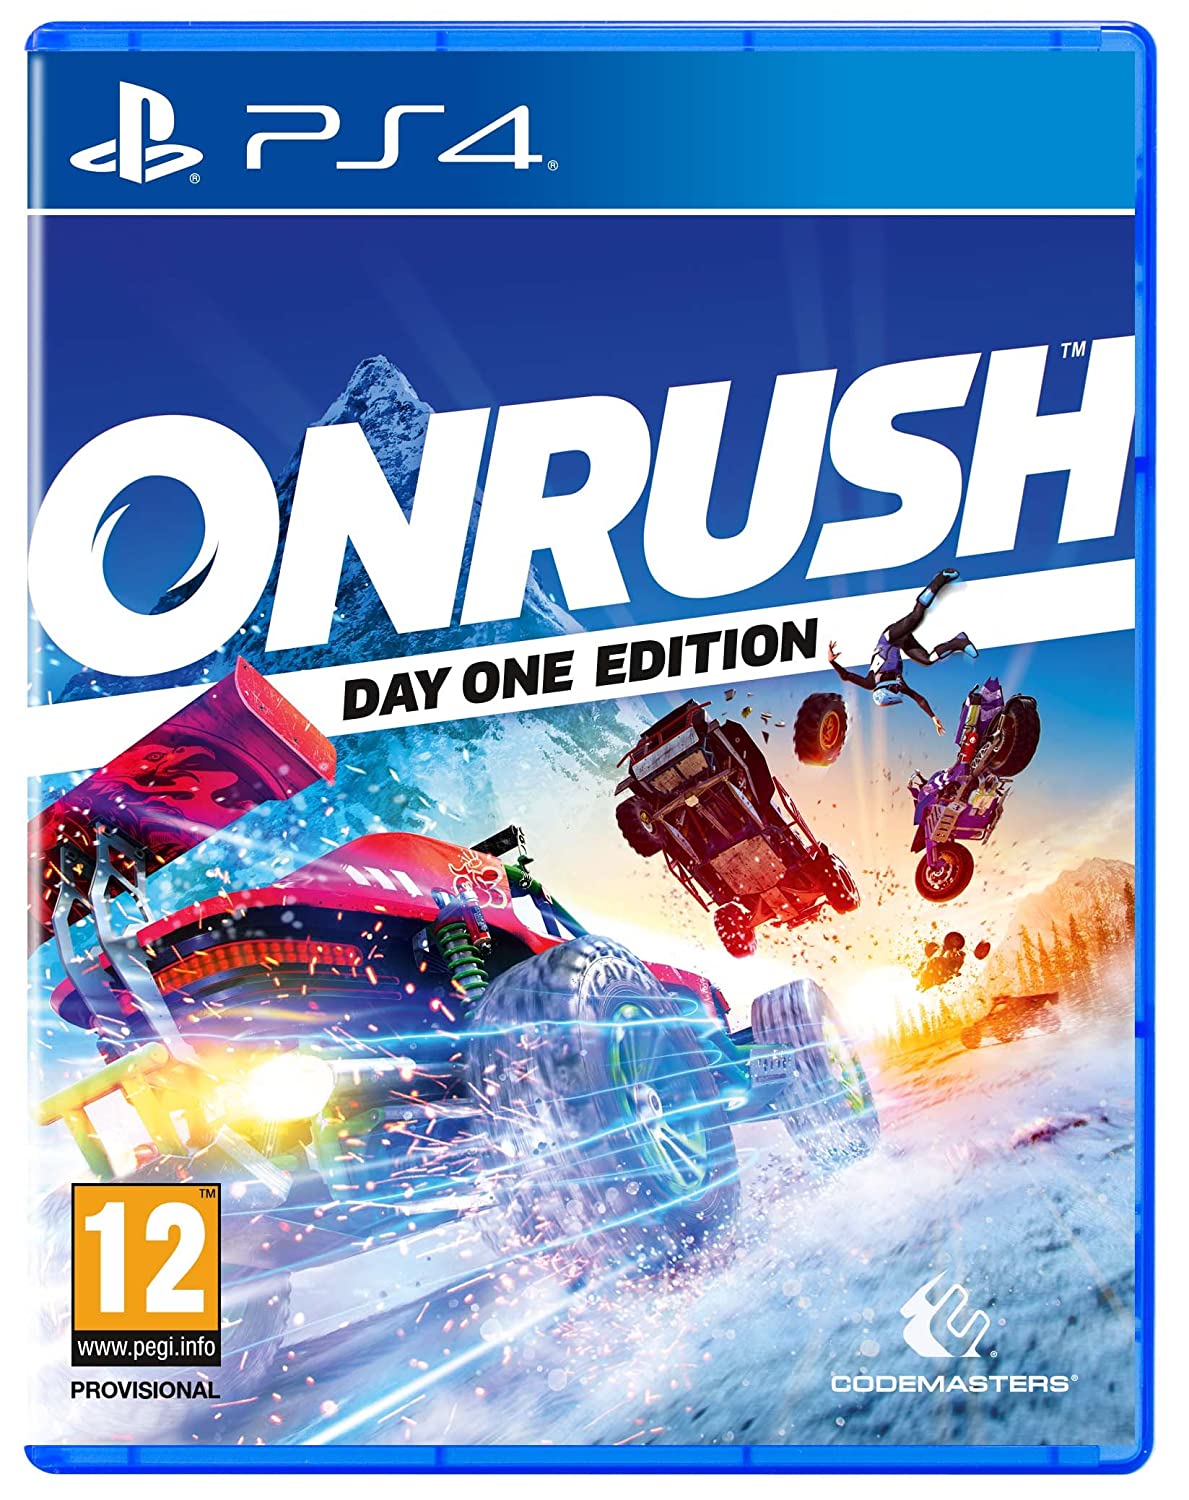 ONRUSH (PS4) DAY ONE EDITION